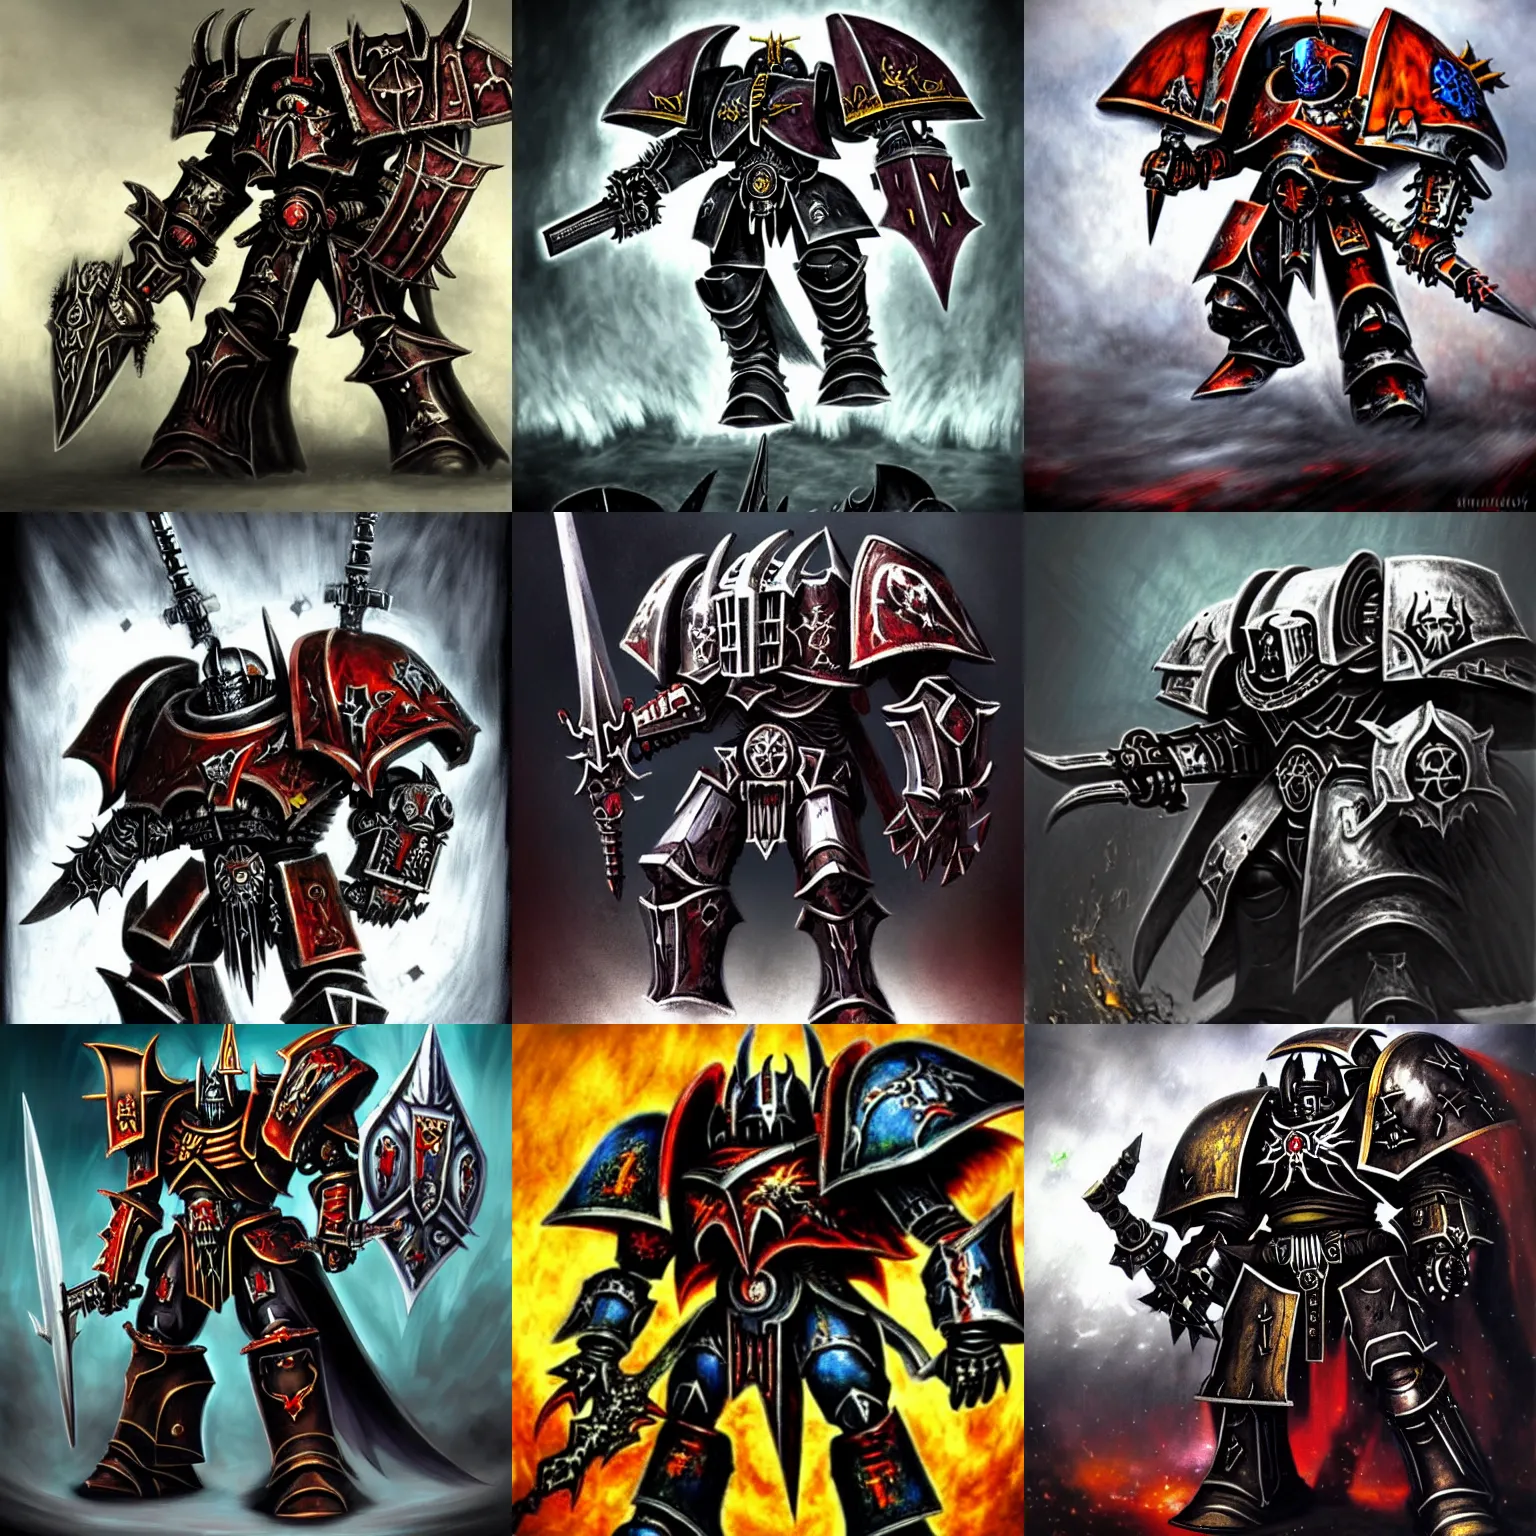 Prompt: wh 4 0 k art, chaos knight